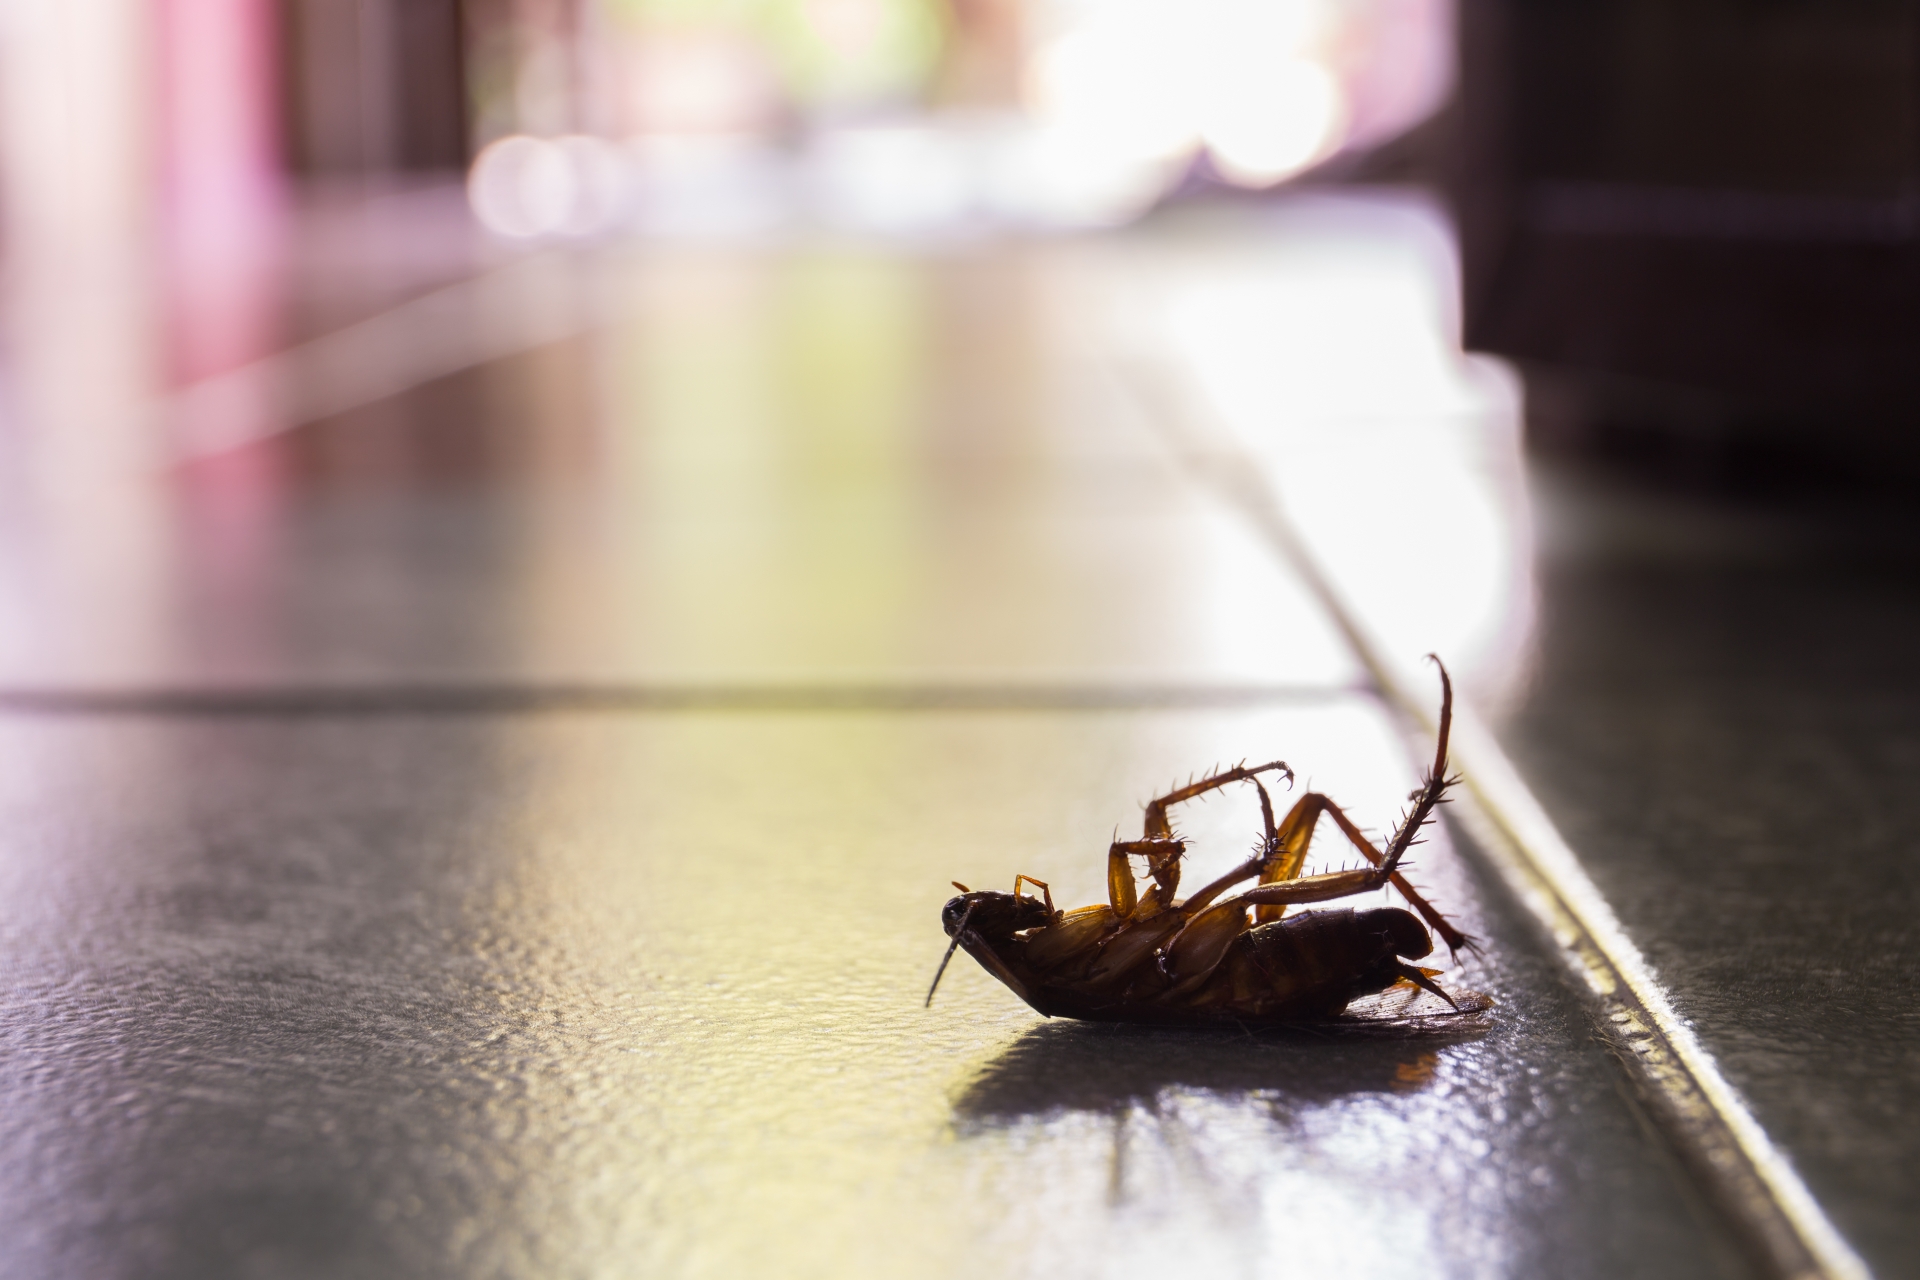 Cockroach Control, Pest Control in Winchmore Hill, N21. Call Now 020 8166 9746